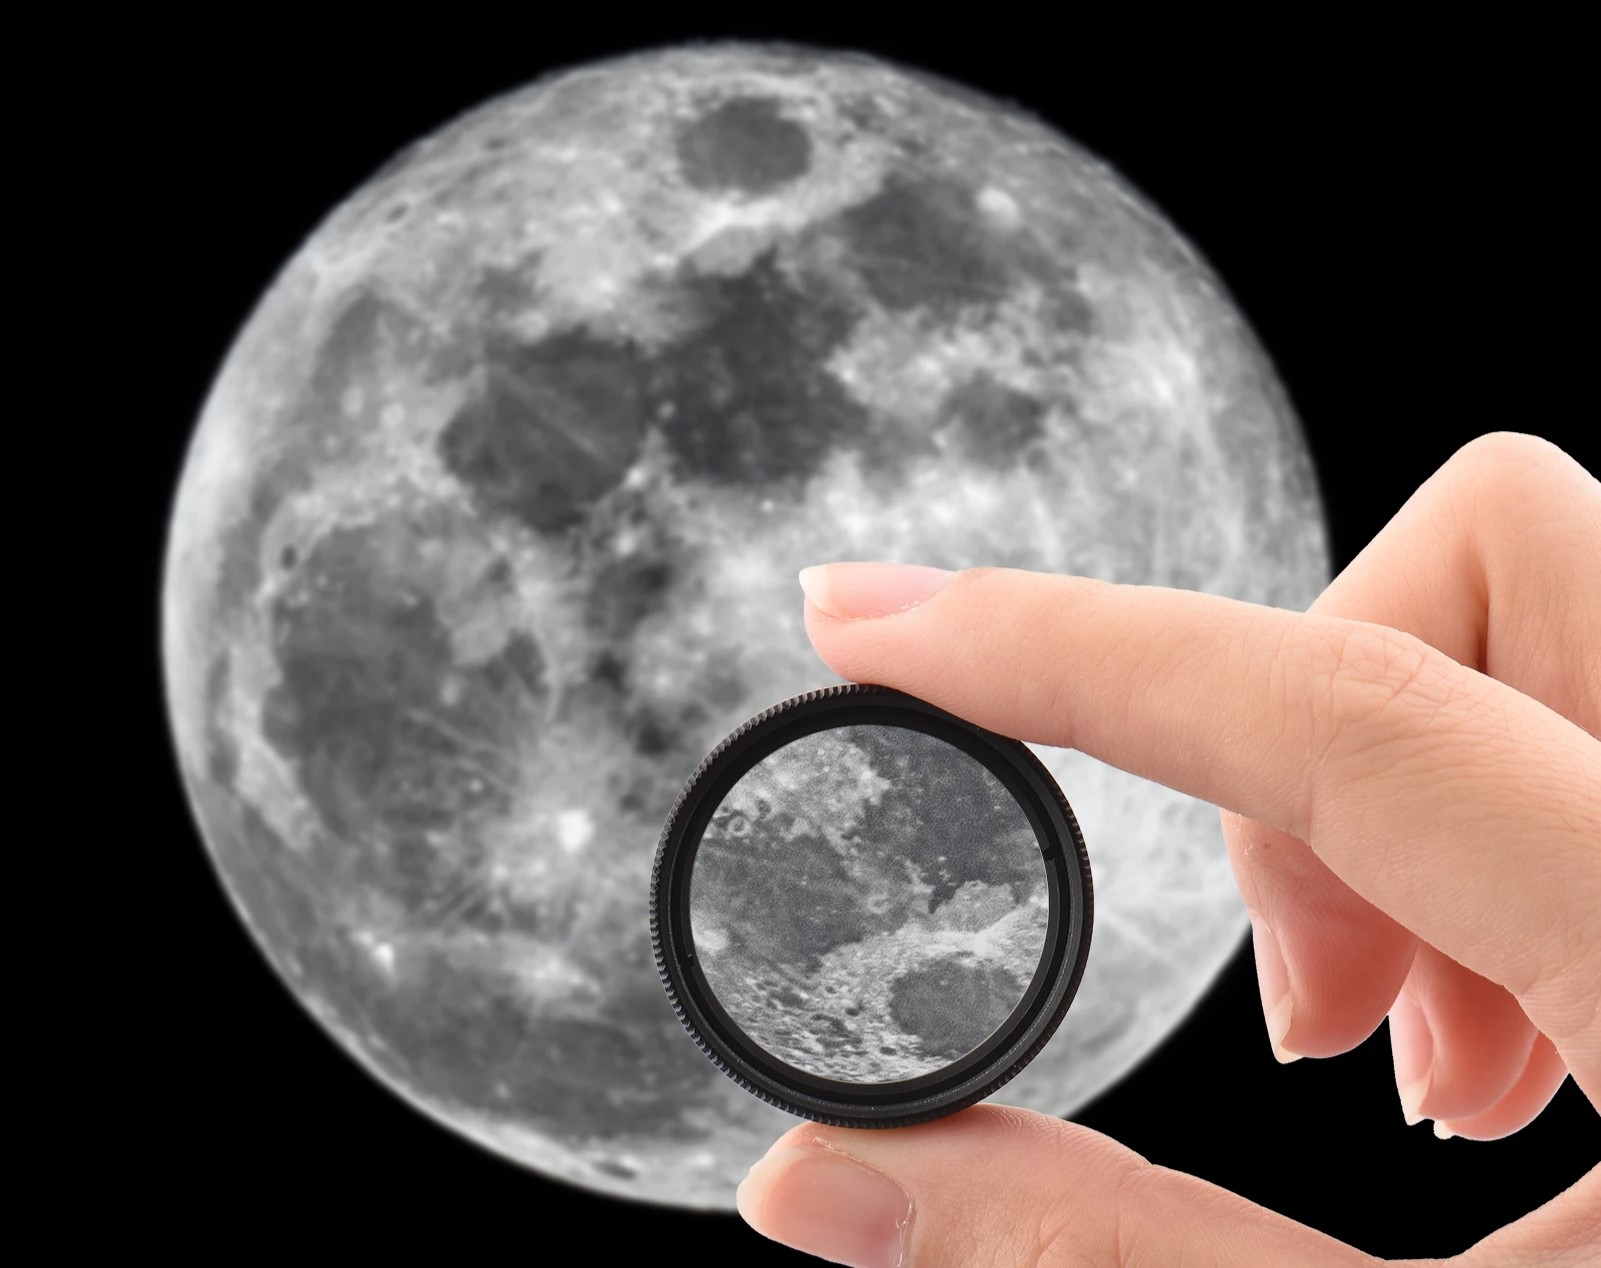 Review: Moon Filter - Enhance Your Stargazing Experience